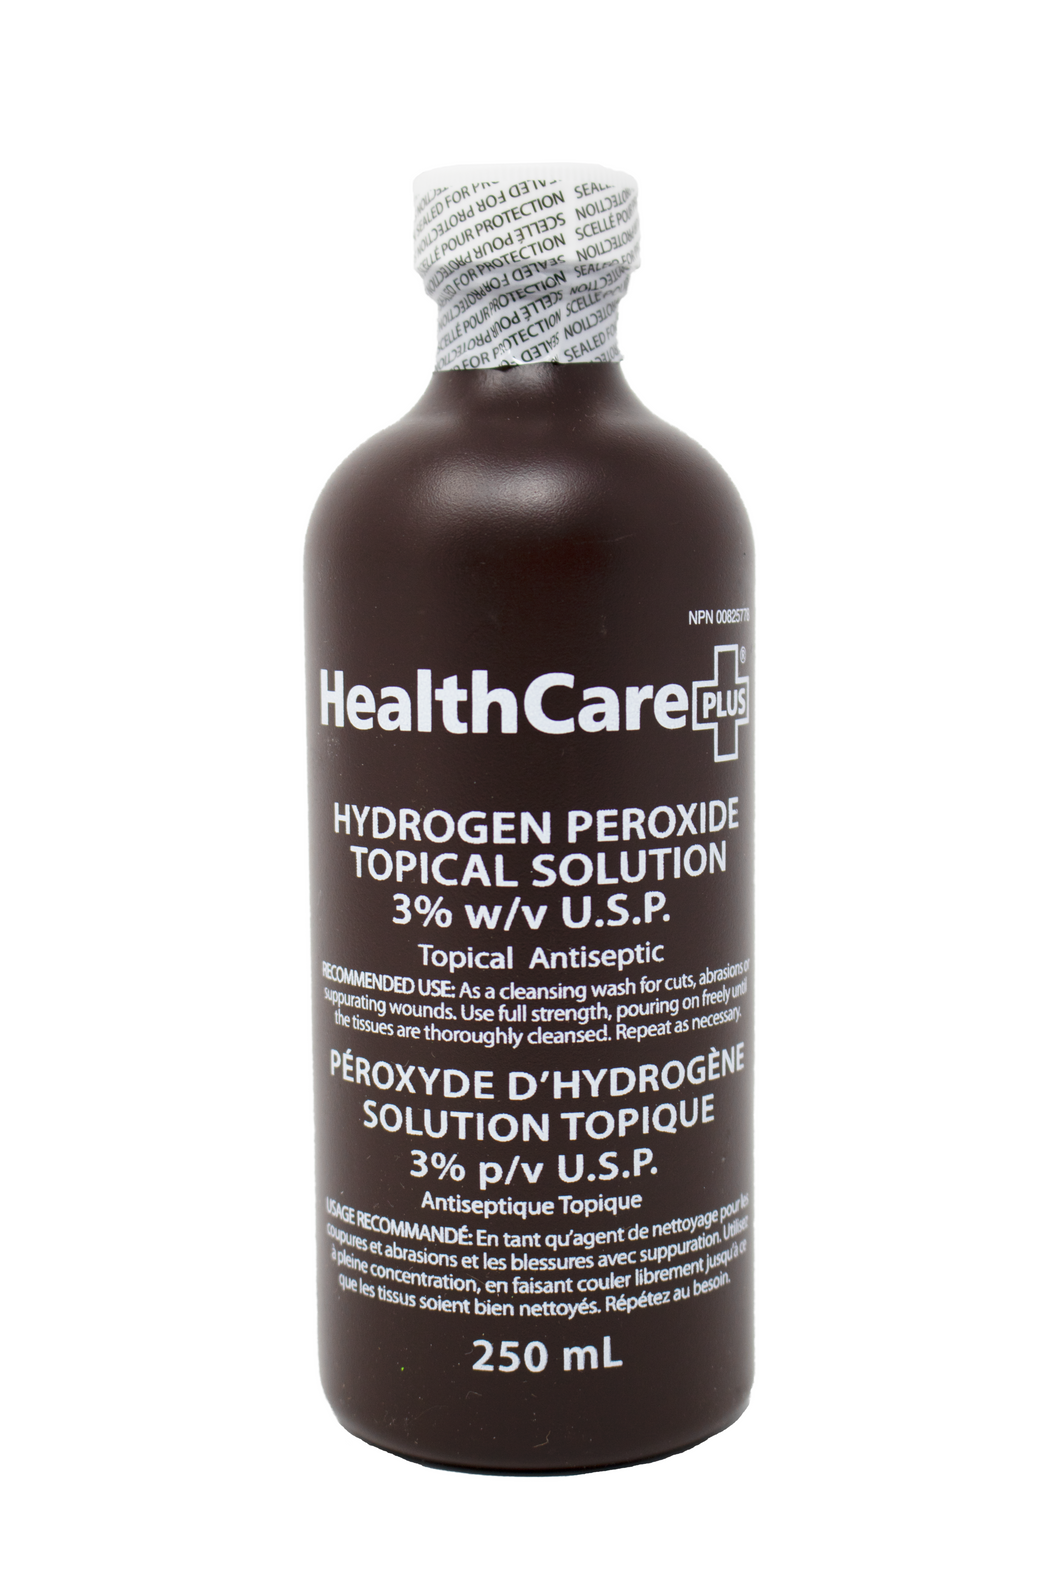 HealthCare Plus Hydrogen Peroxide Topical Solution 3% w/v U.S.P. (250ml)